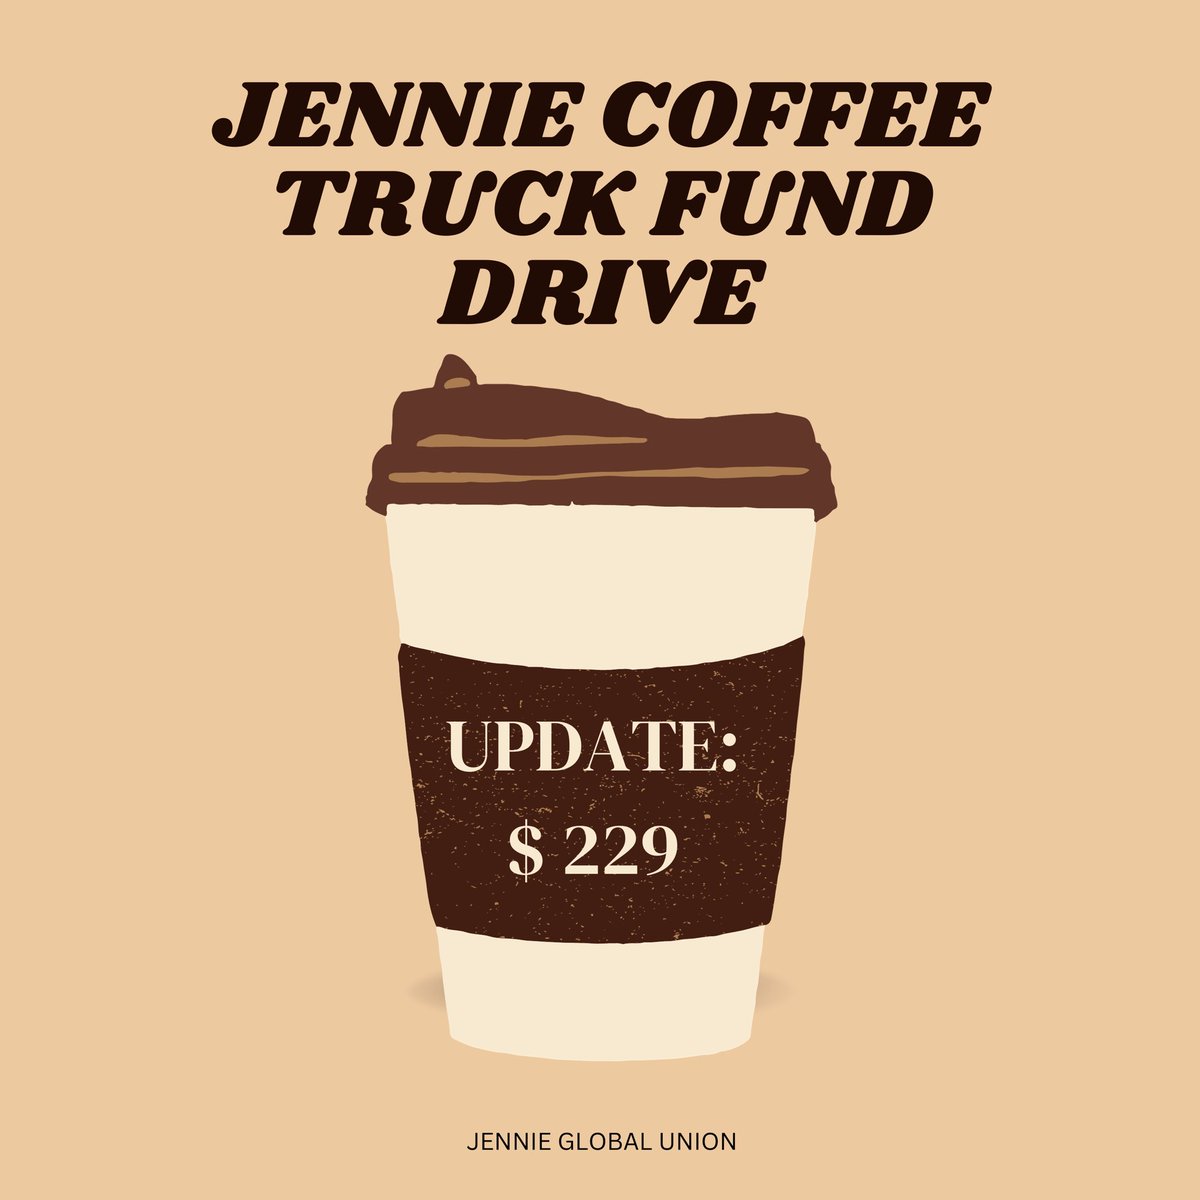 FUND DRIVE UPDATE FOR JENNIE COFFEE TRUCK PROJECT - APARTMENT 404 Thank you for this great start. We appreciate your continued support. Can we secure this gift for #JENNIE? PAYPAL: paypal.me/mandoojennievn paypal.me/onlyjennieph GCASH: 09264107096 THANK YOU!